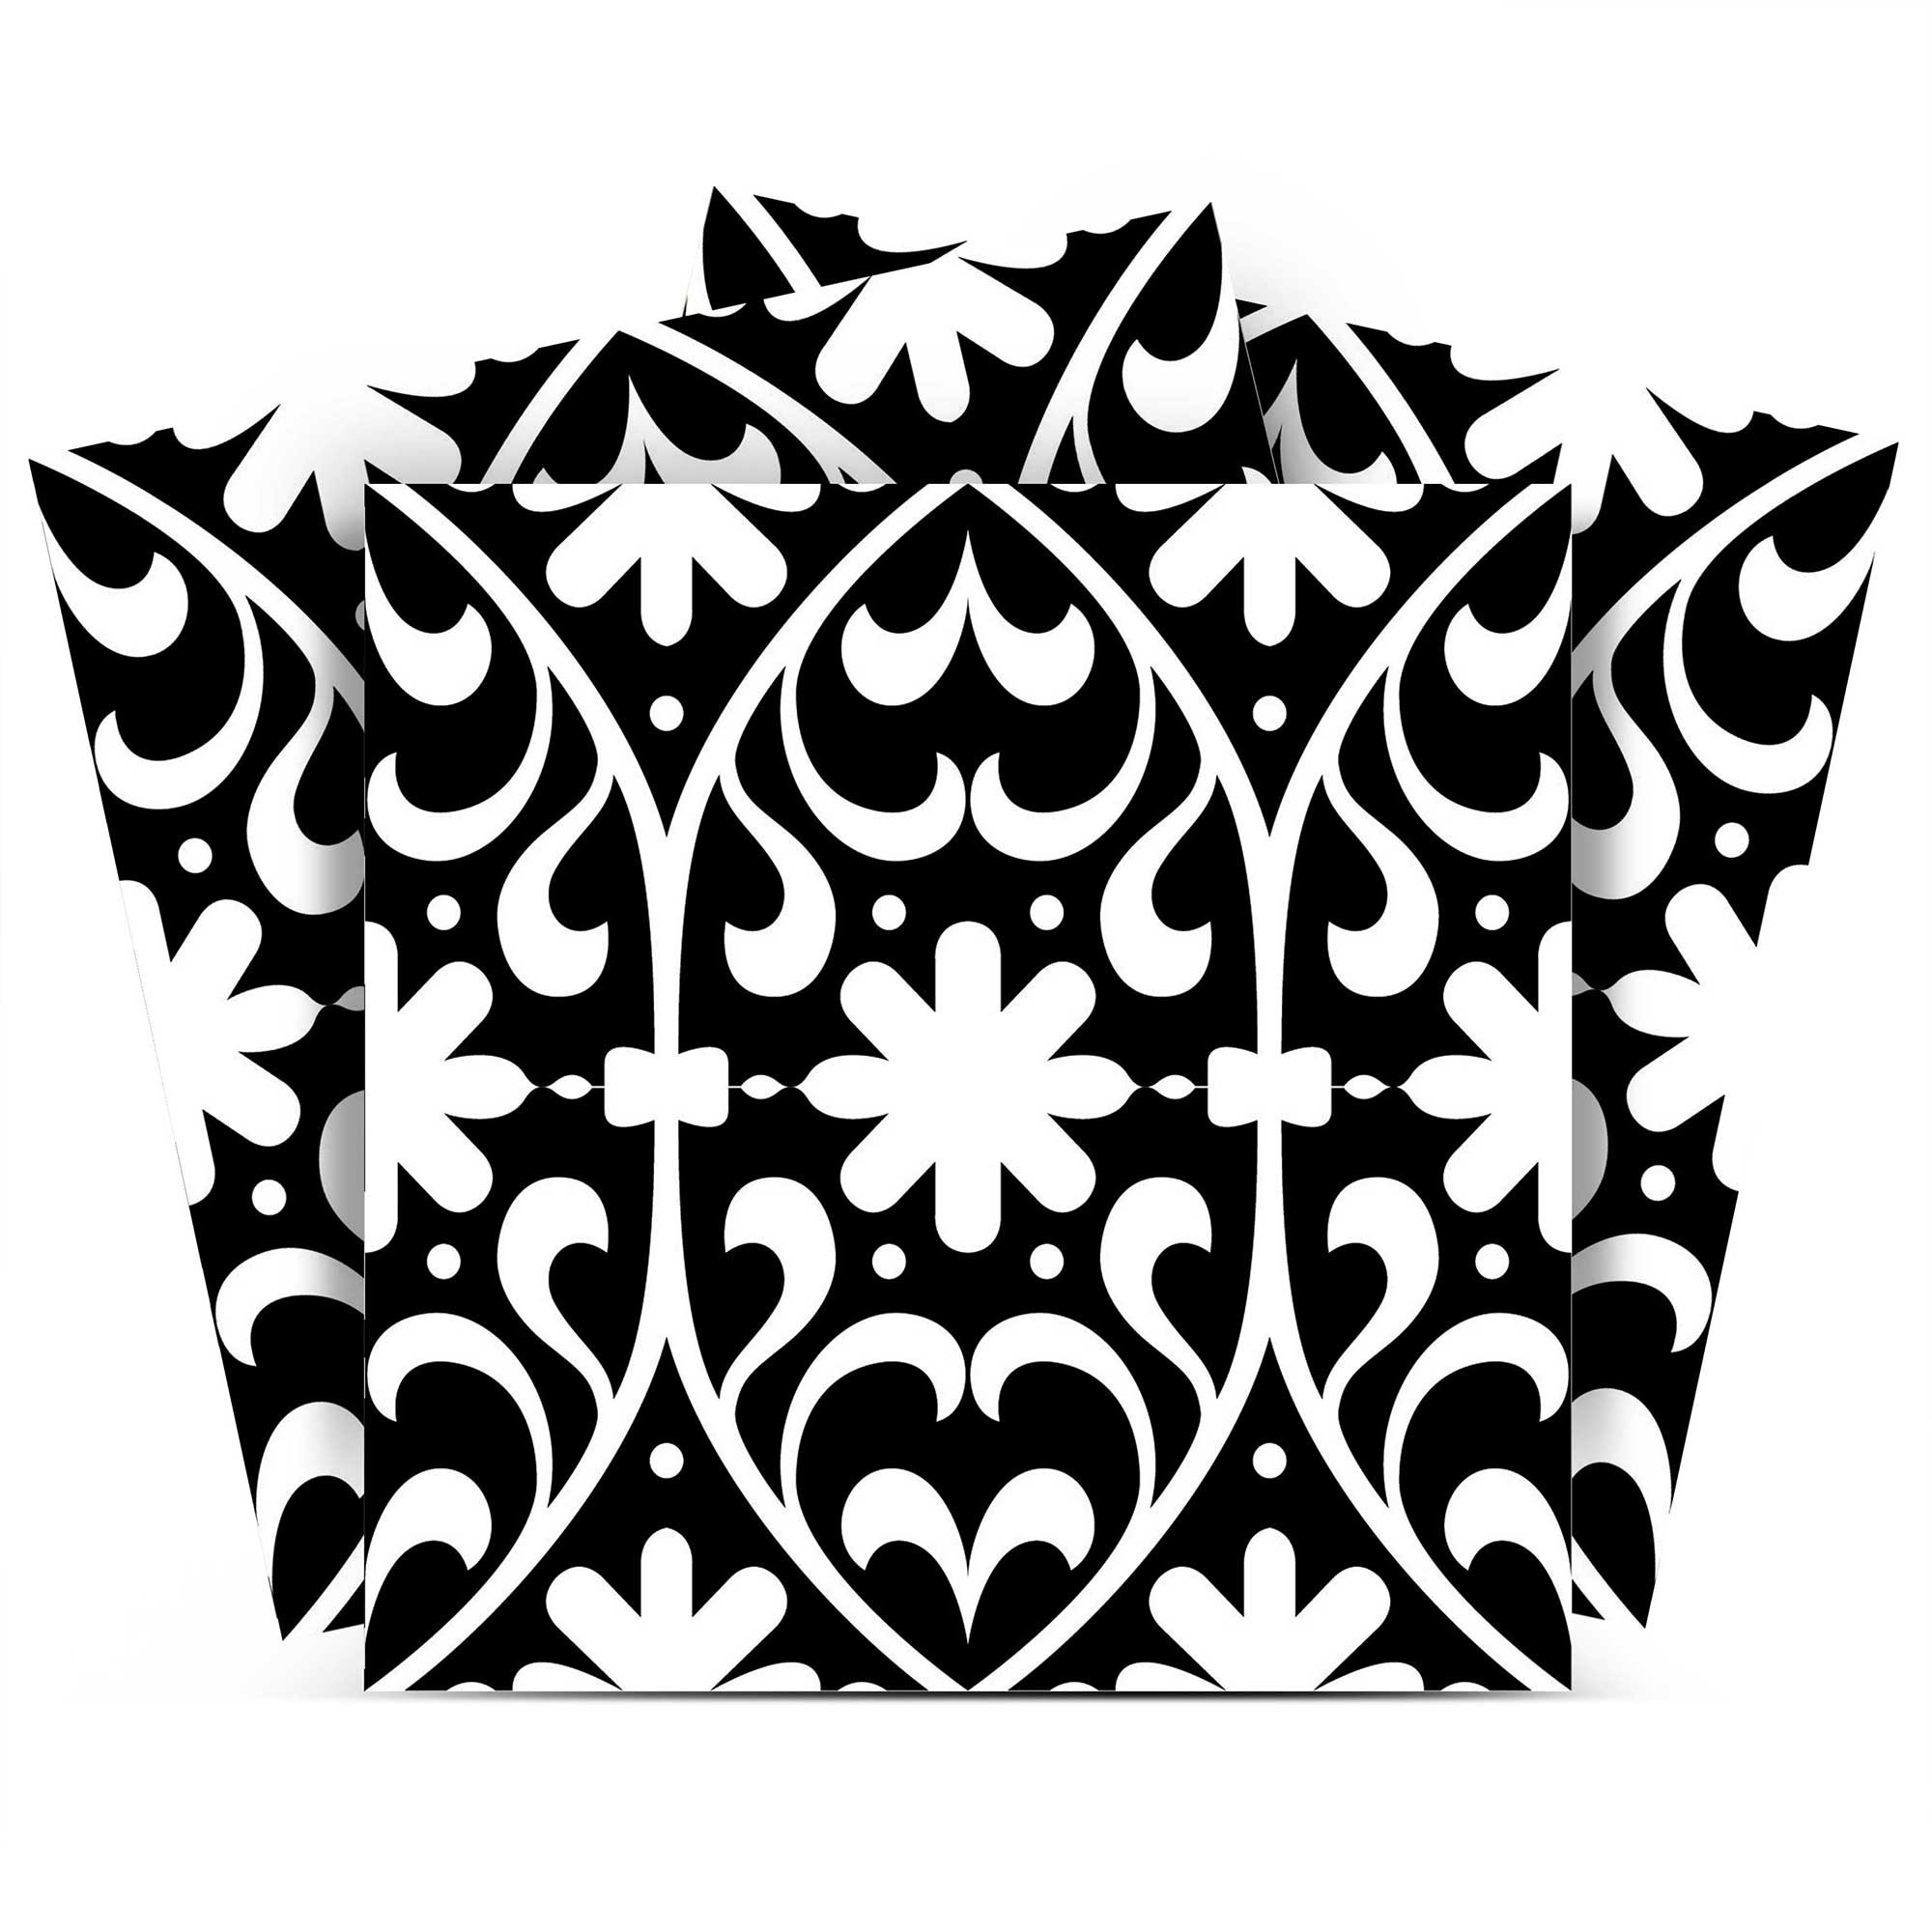 5" X 5" Black and White Floral Peel and Stick Removable Tiles-399876-1